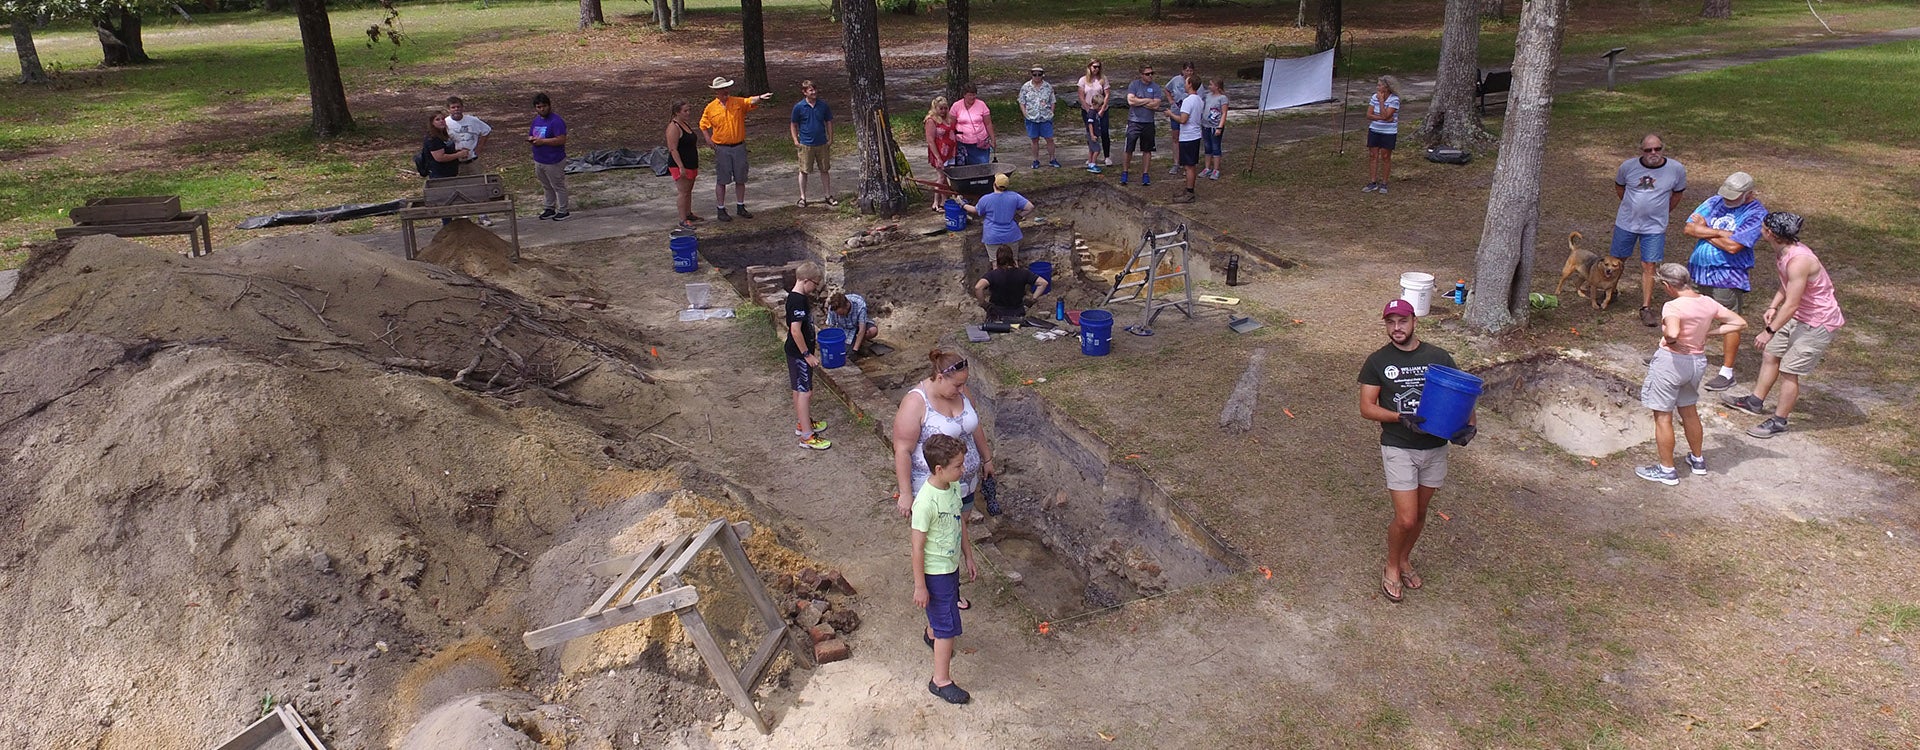 A dozen ECU students spent four weeks this summer excavating the remains of a previously unknown 18th century tavern near Southport.